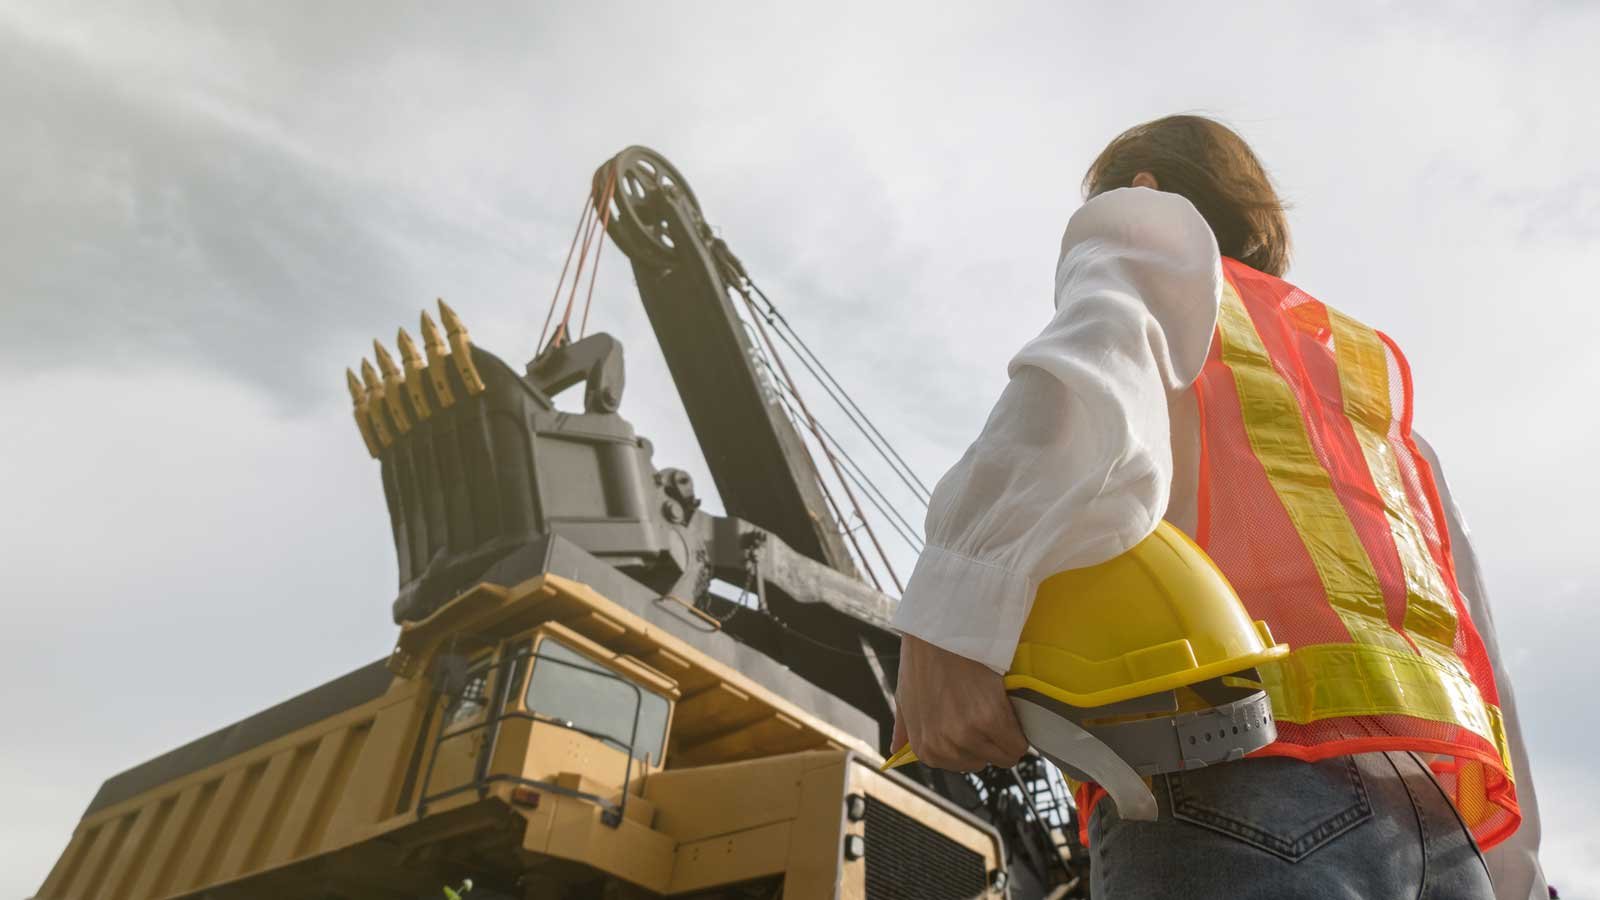 Man looking up at machine holding hard hat on his waist